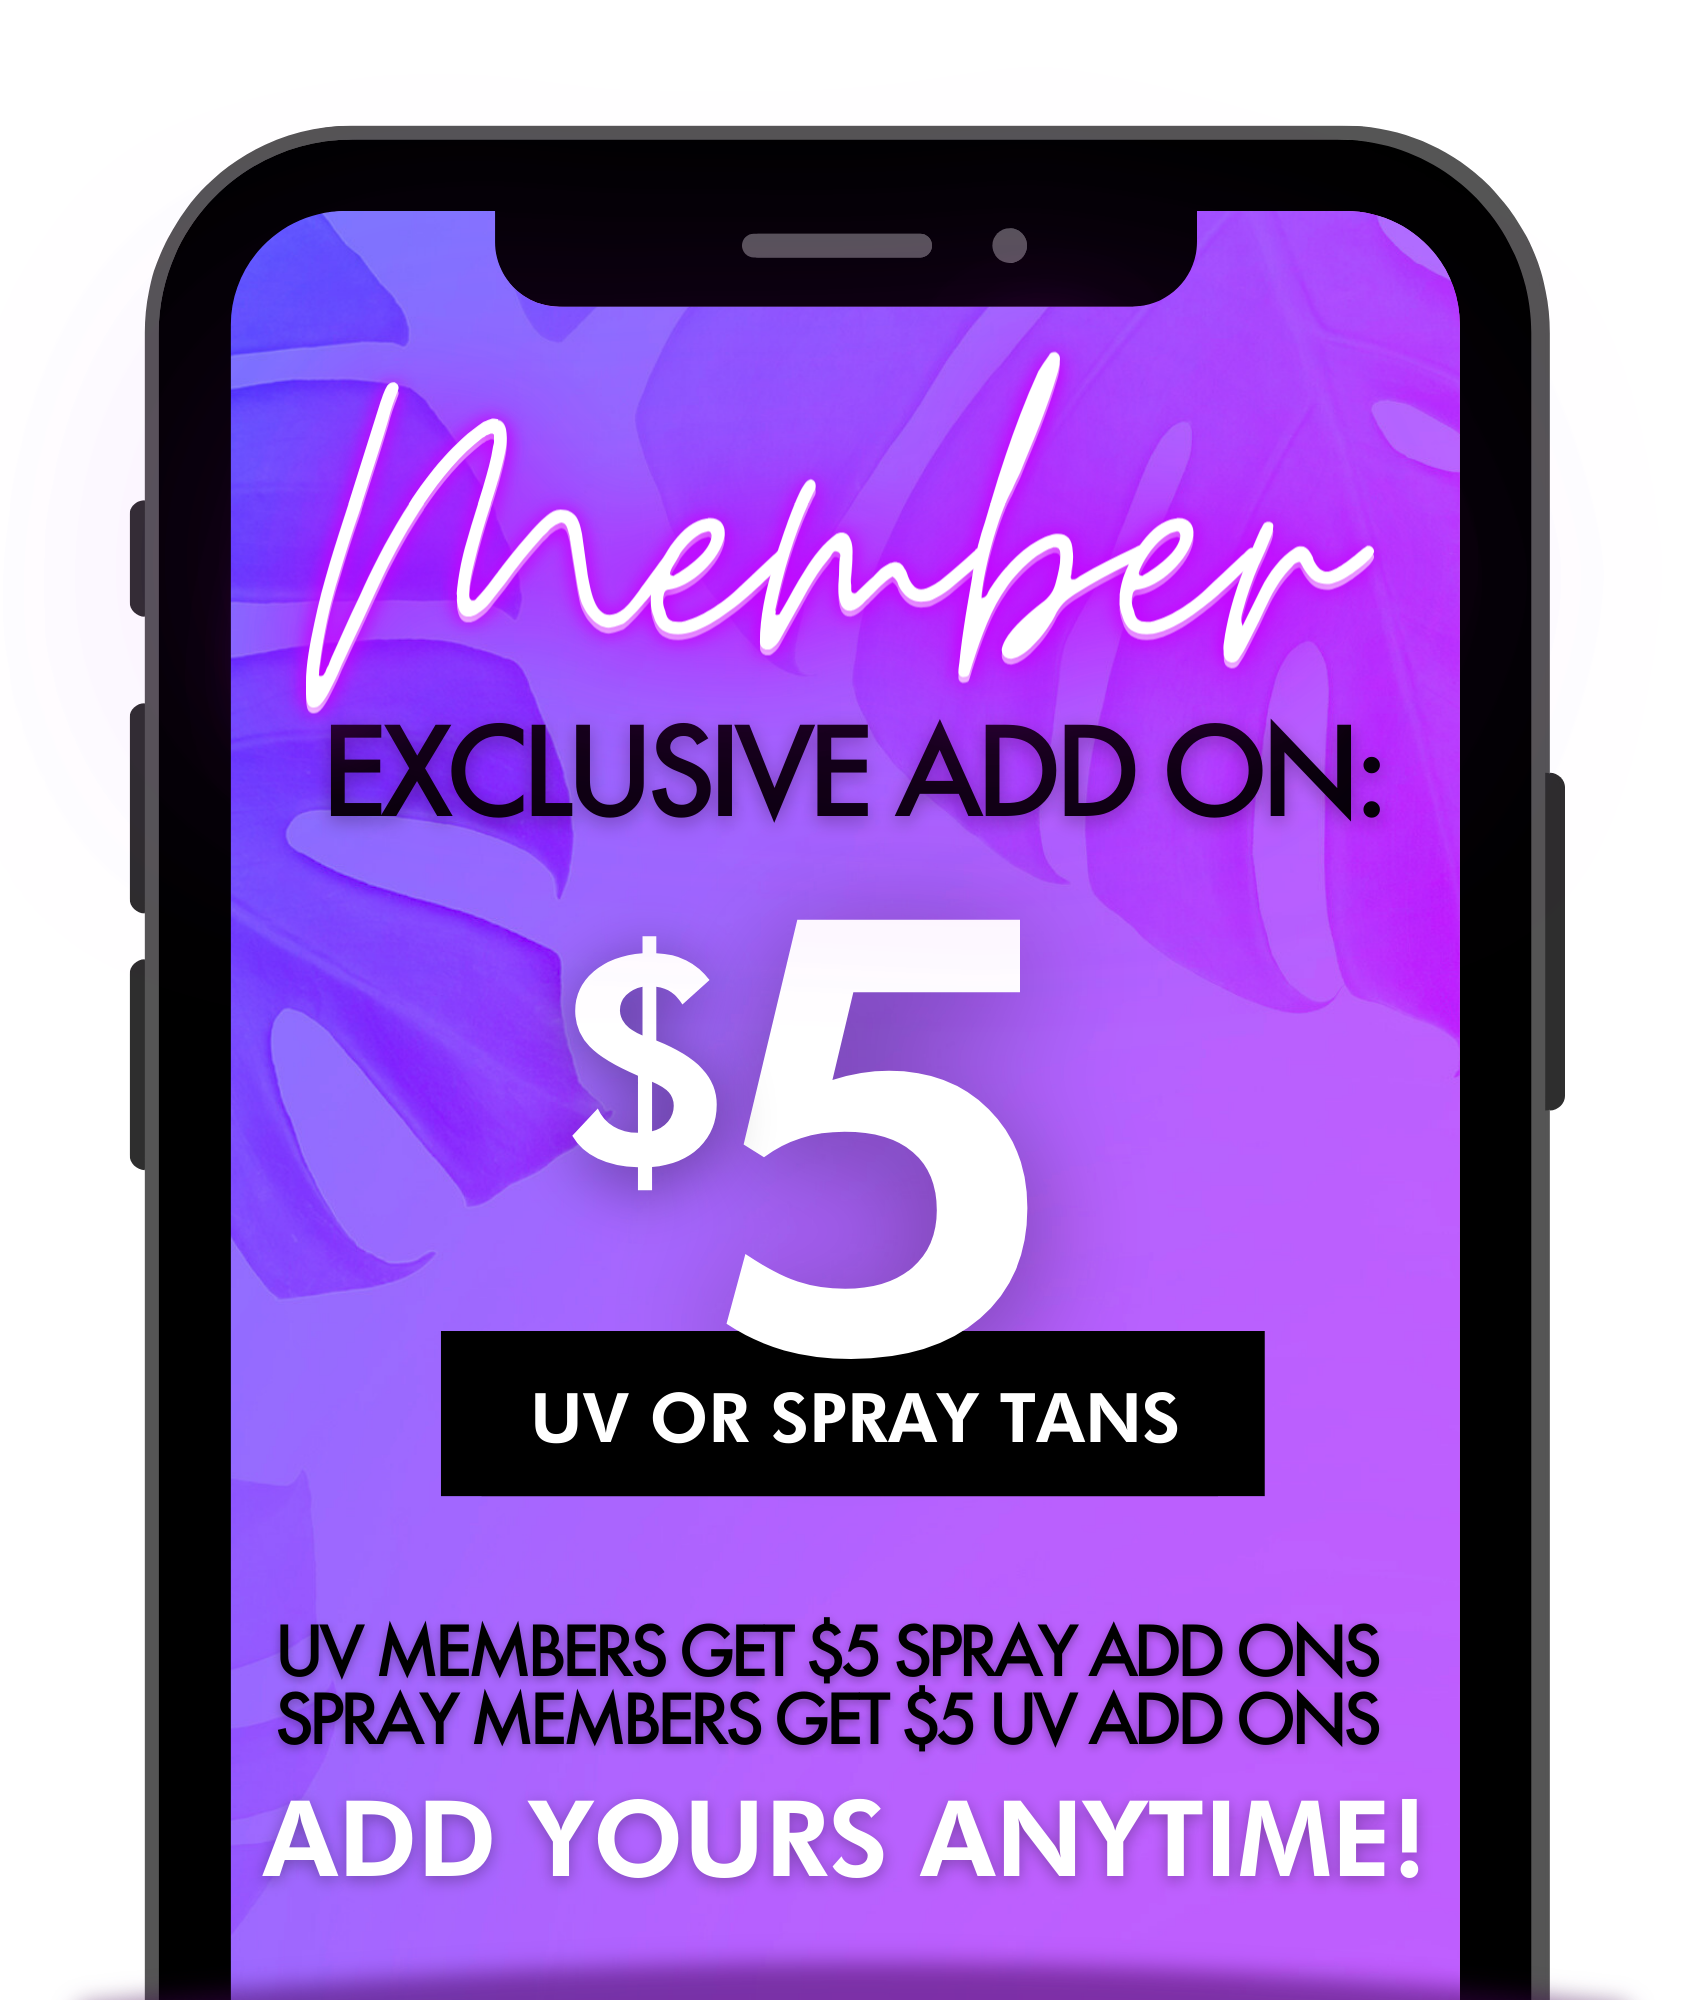 Get every day Sun Tanning only $39 per month. With this membership you can add on a spray tan at any time for only $5.